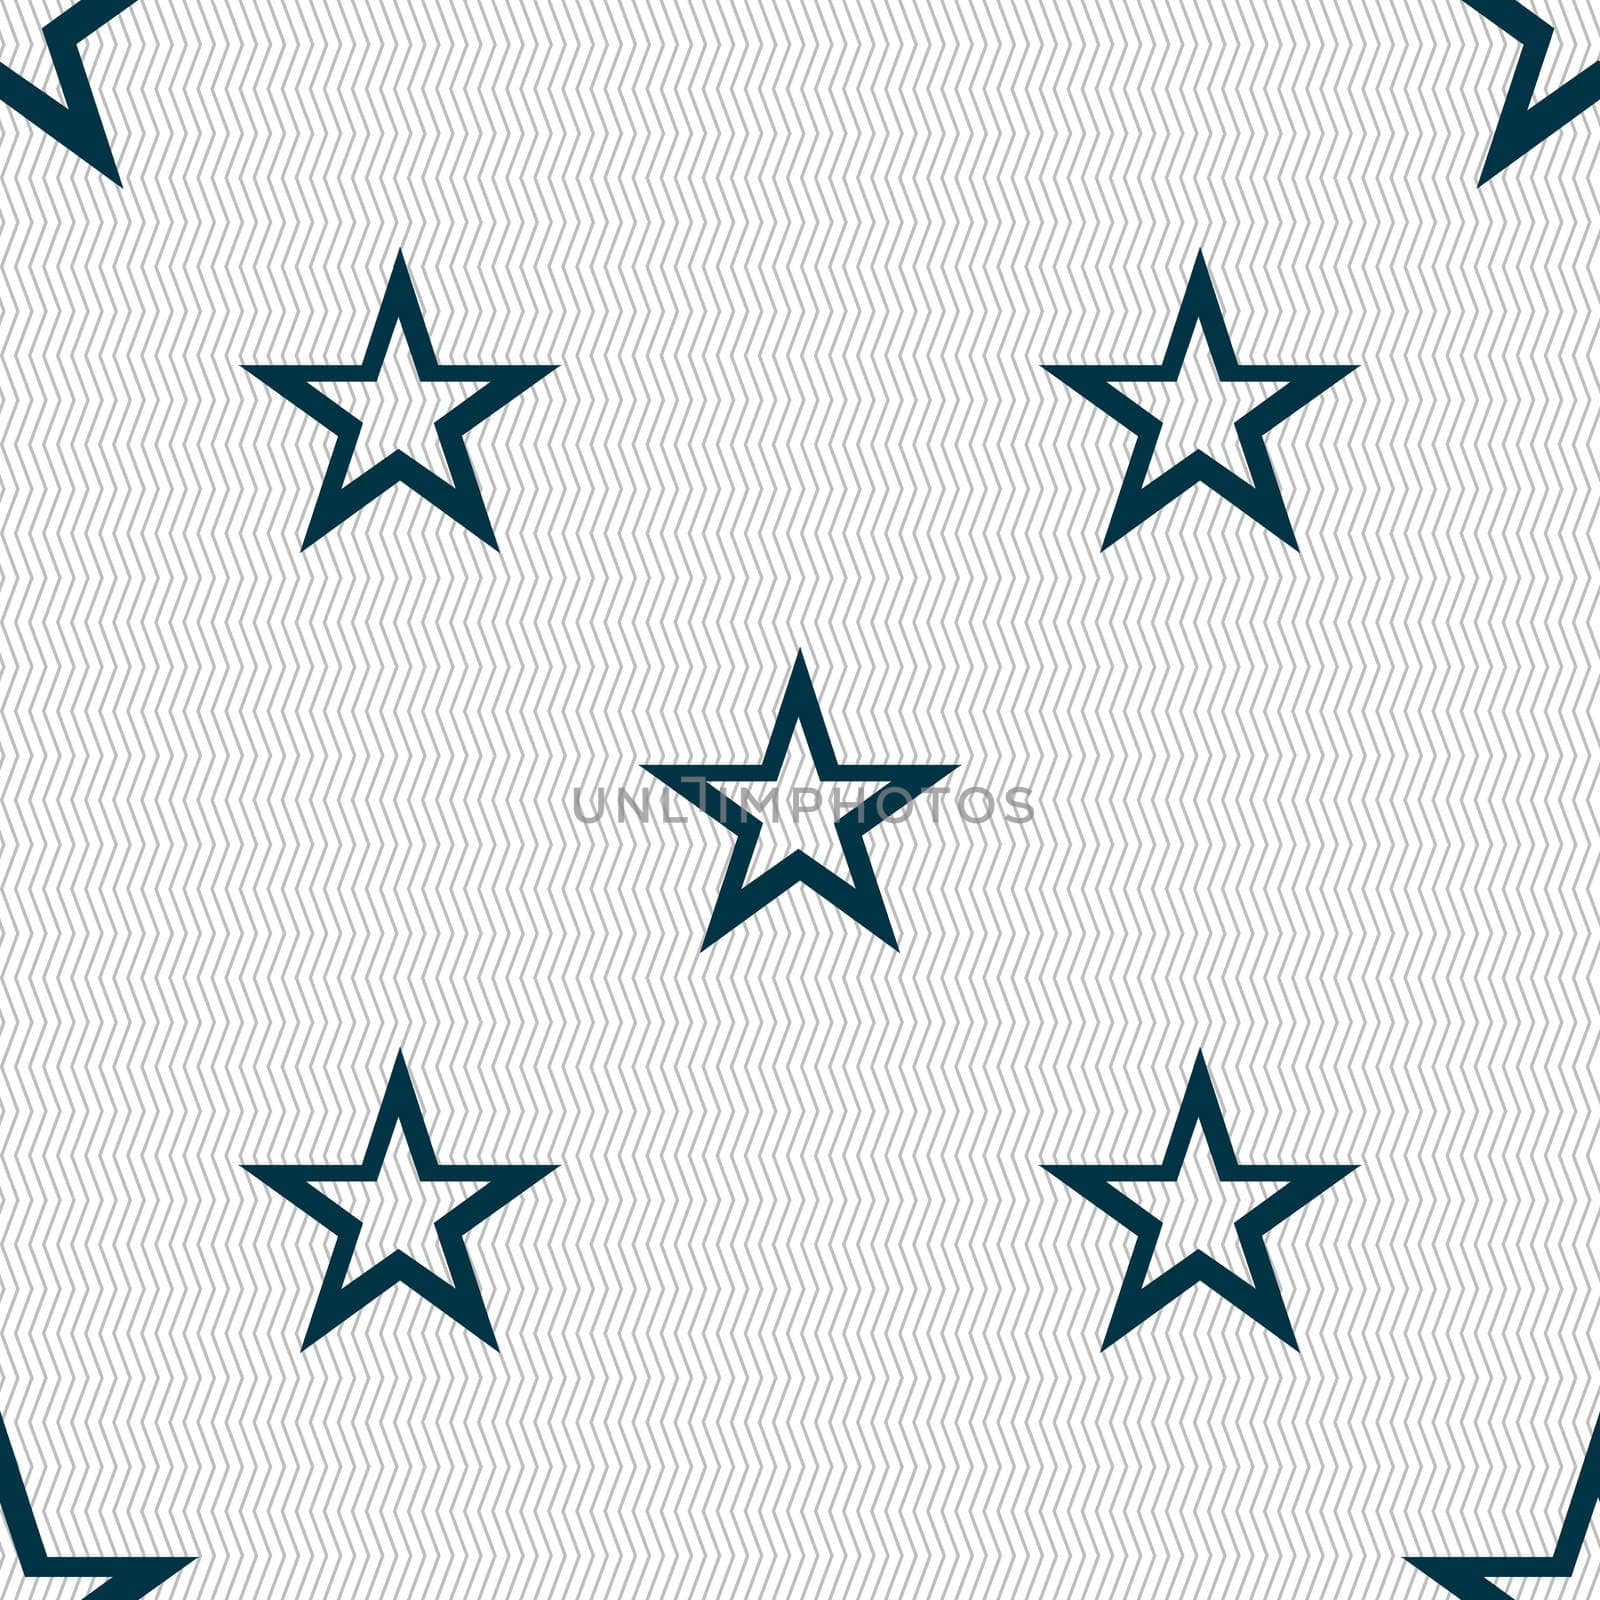 Star sign icon. Favorite button. Navigation symbol. Seamless abstract background with geometric shapes. illustration